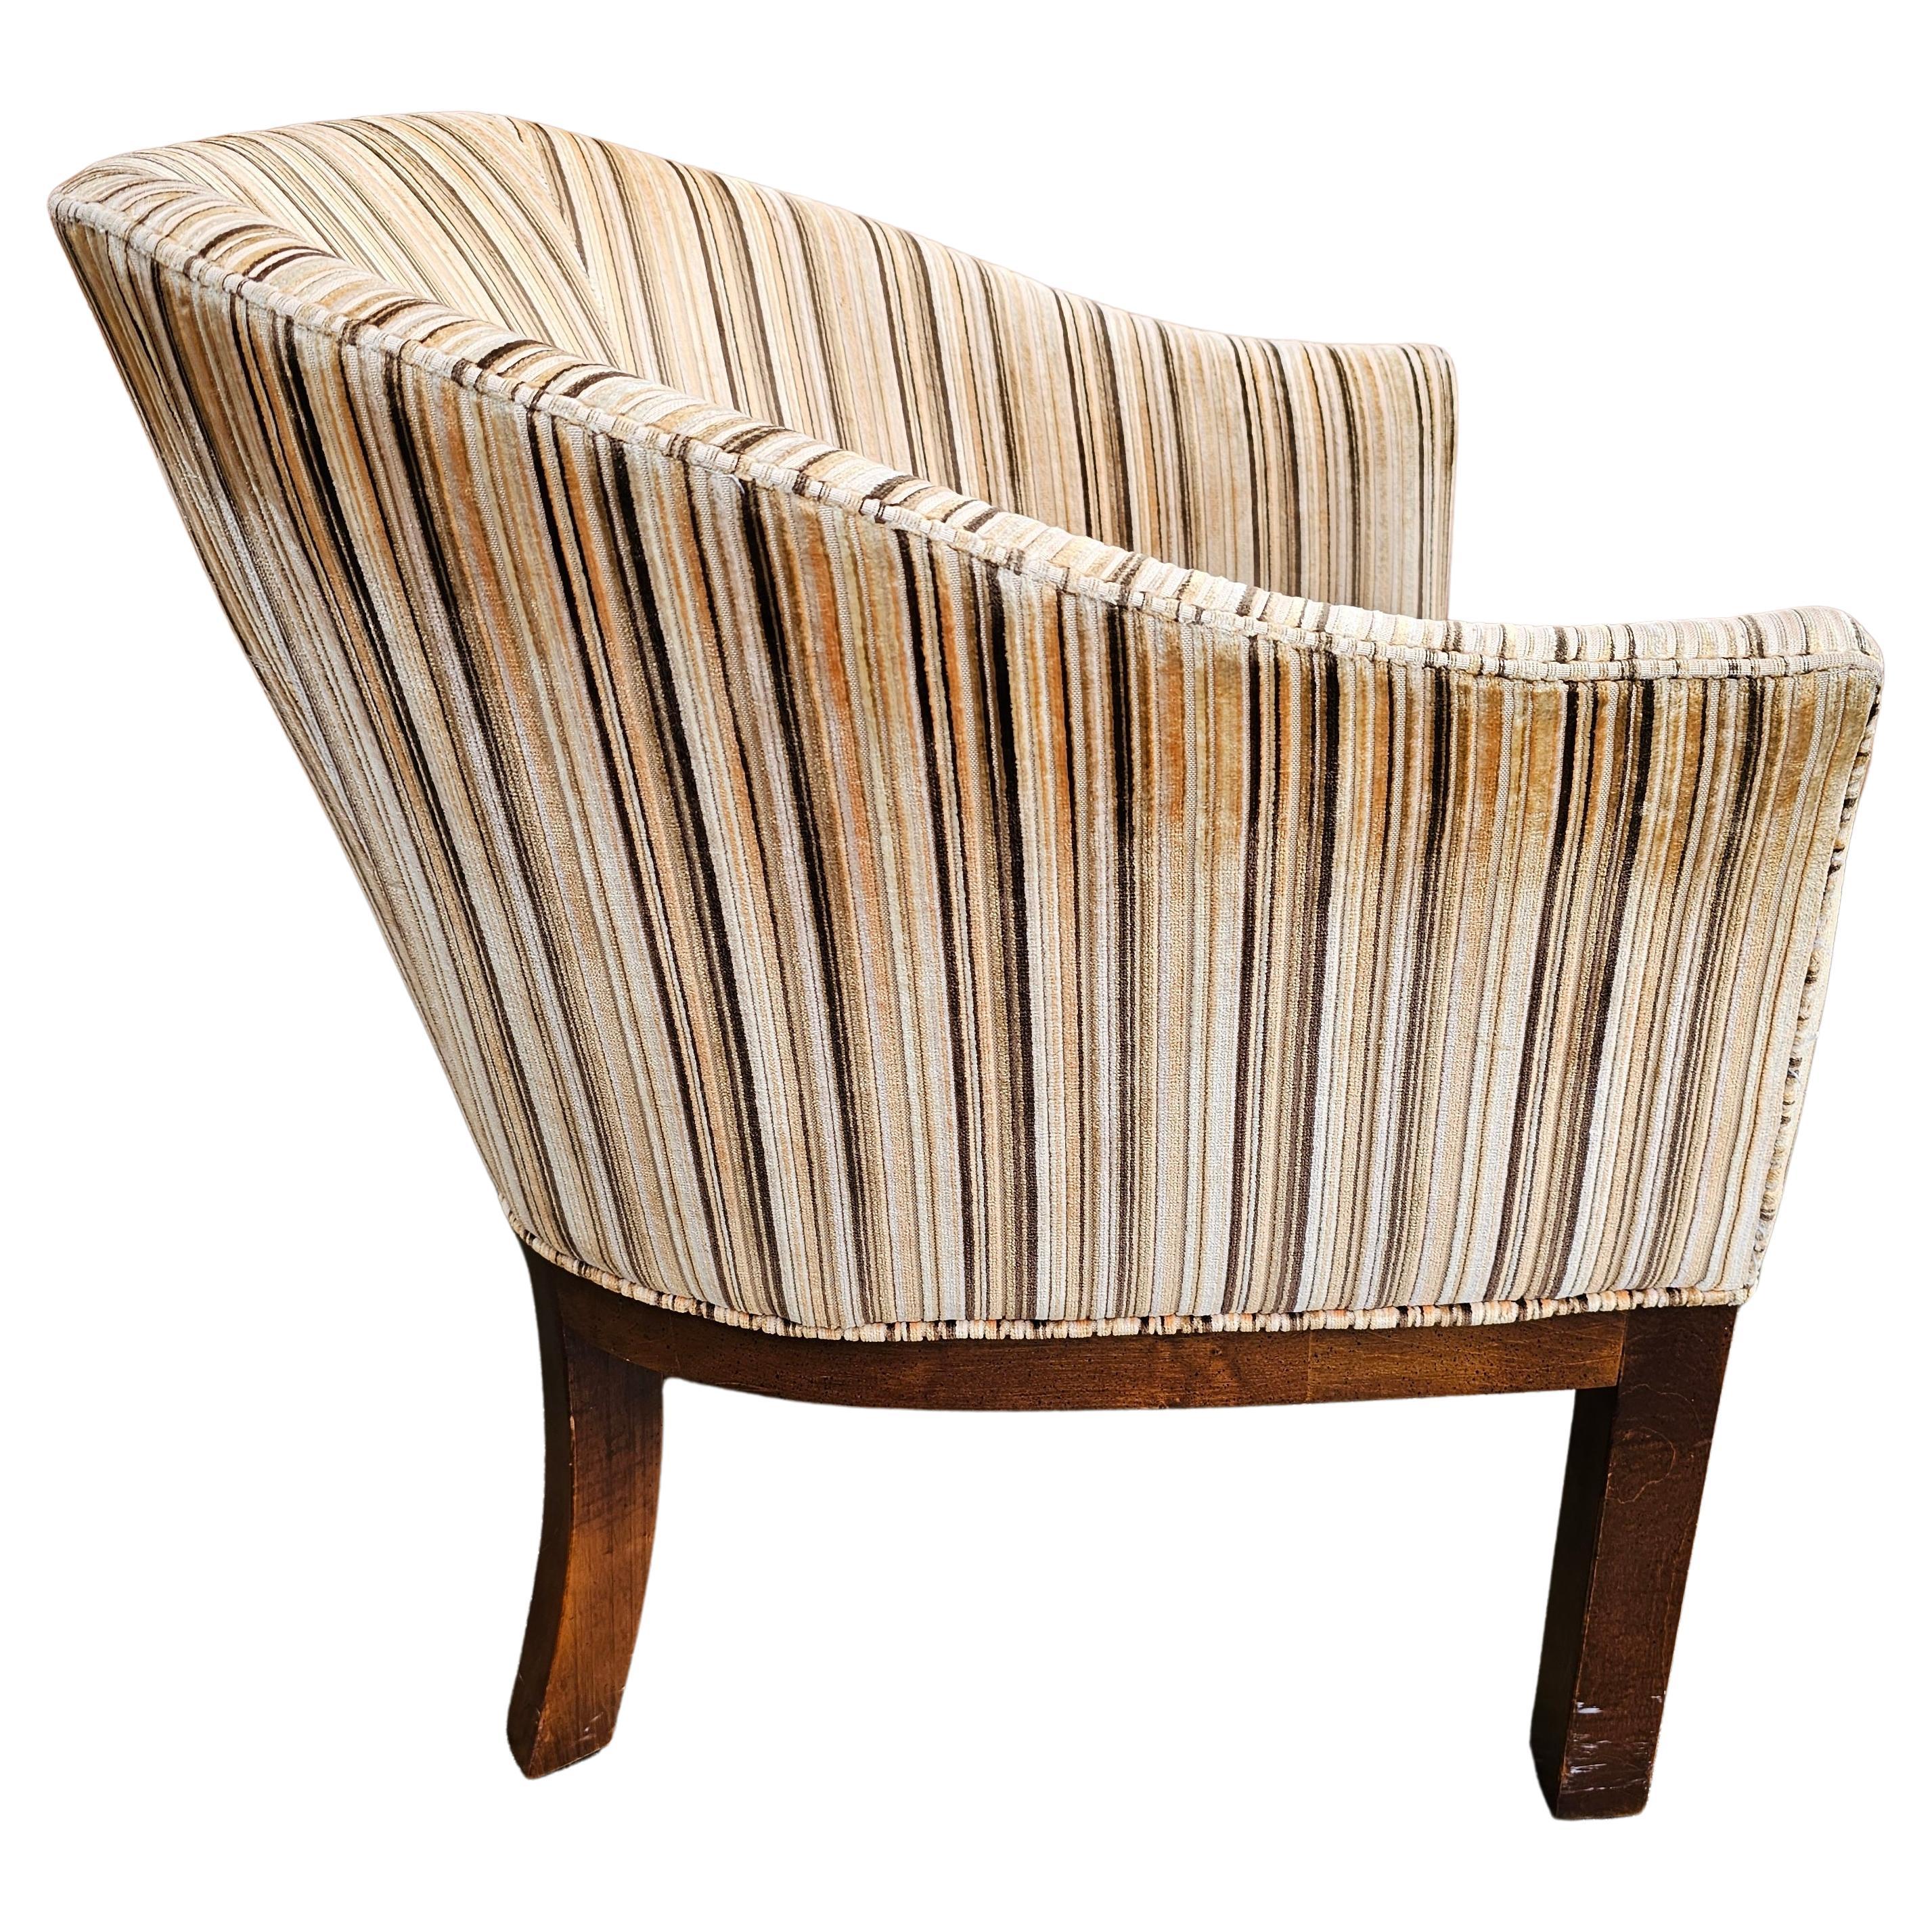 American 20th Century Mahogany and Stripped Velvet Upholstered Barrel Back Club Chair For Sale